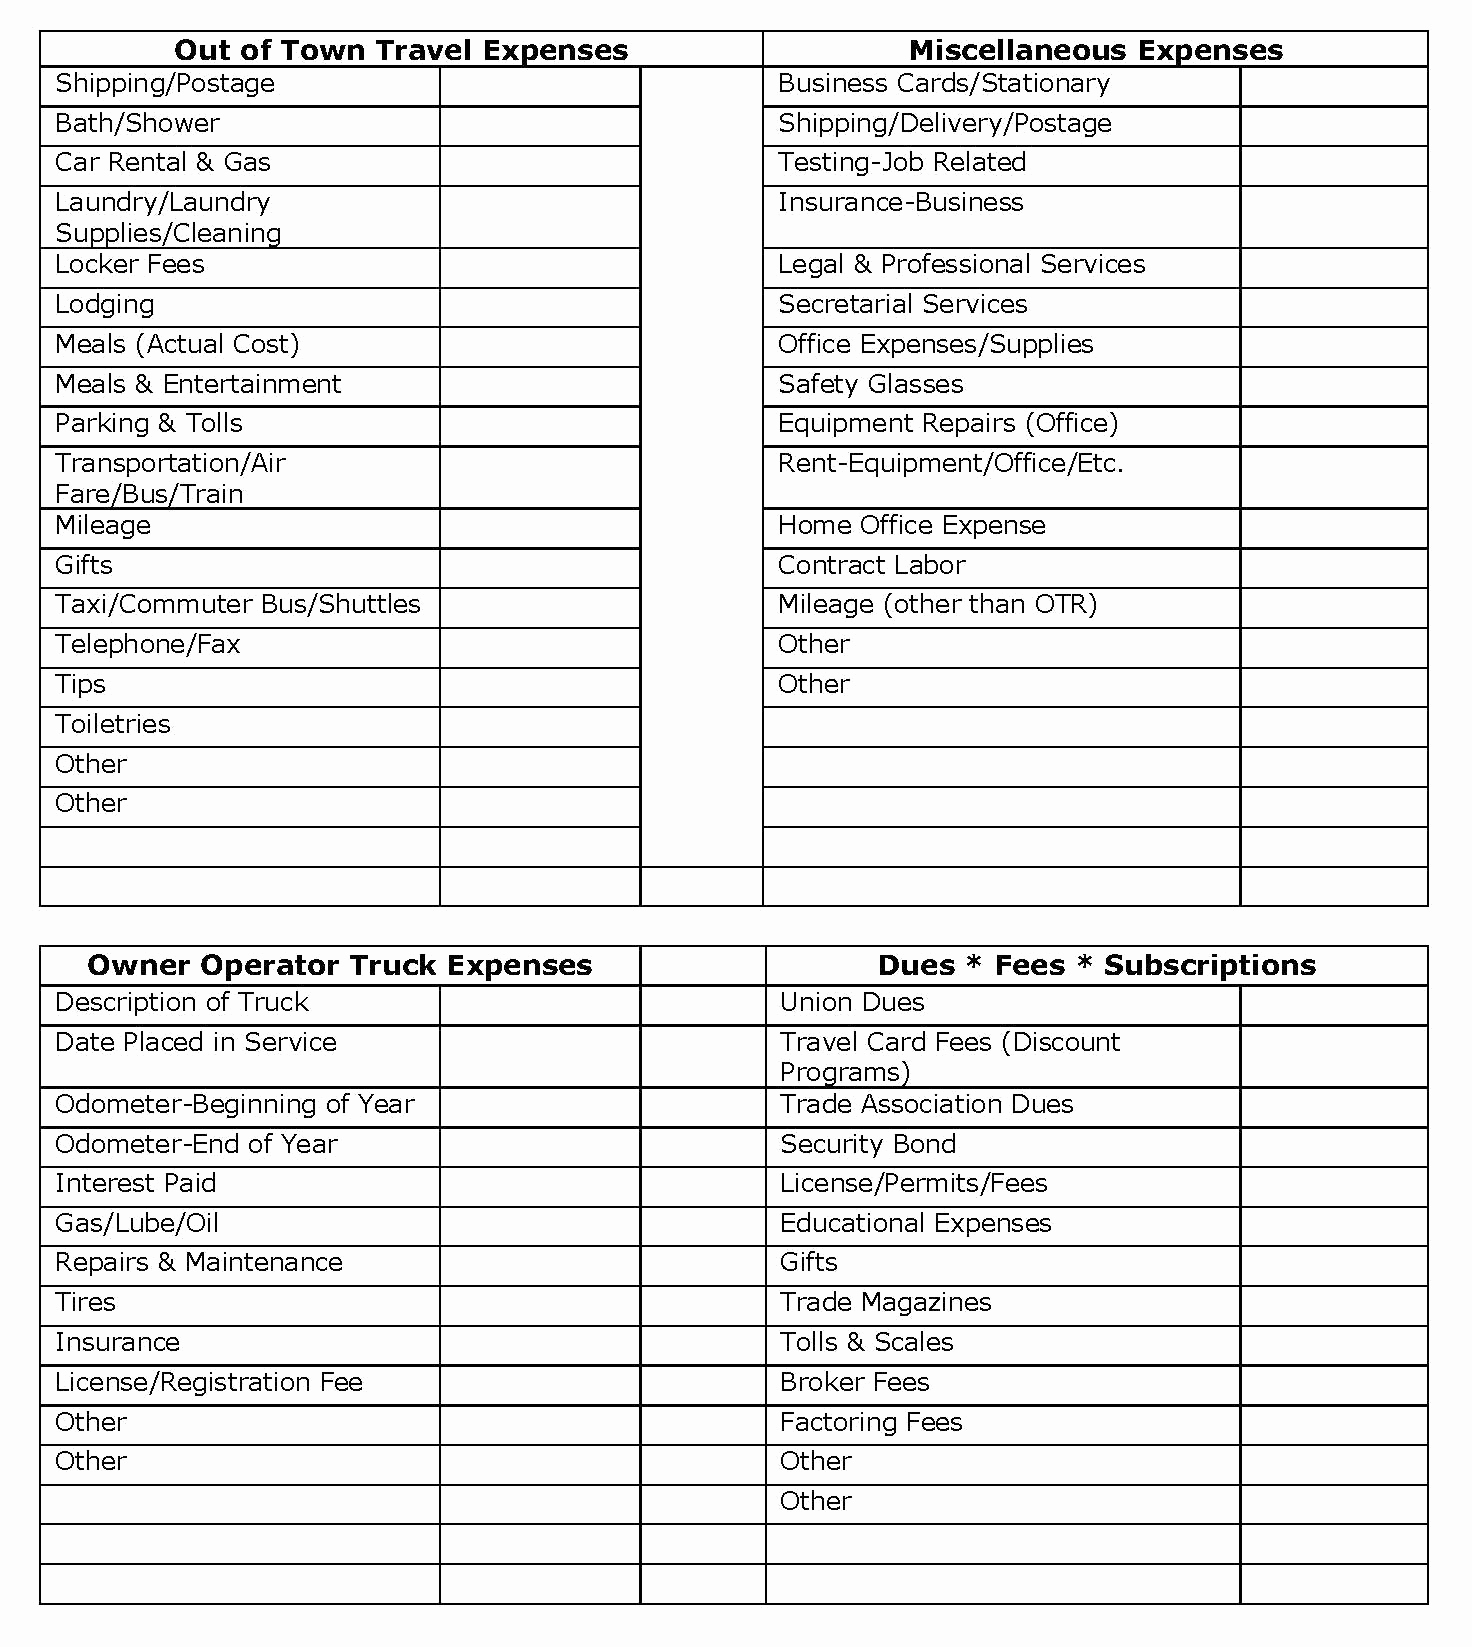 Free Taxi Driver Spreadsheet Within Trucking Expenses Spreadsheet Full Size Of Expensesdsheet Truck